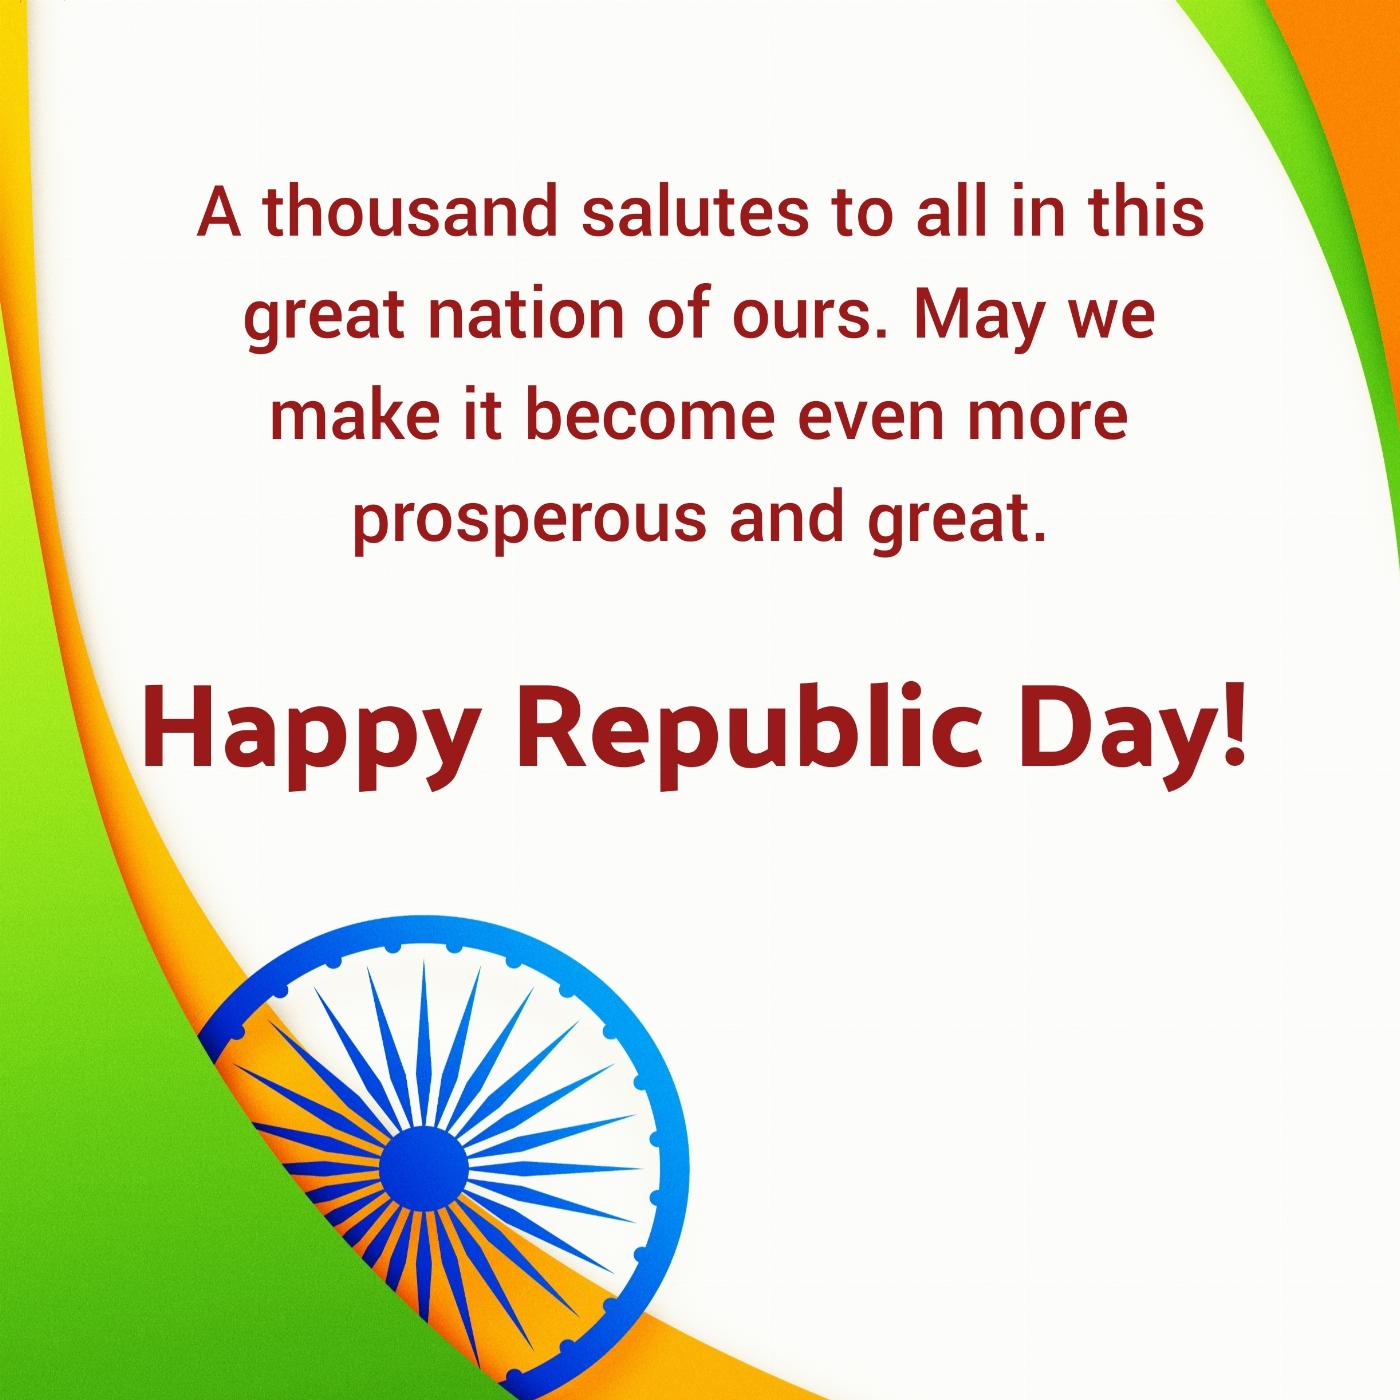 A thousand salutes to all in this great nation of ours